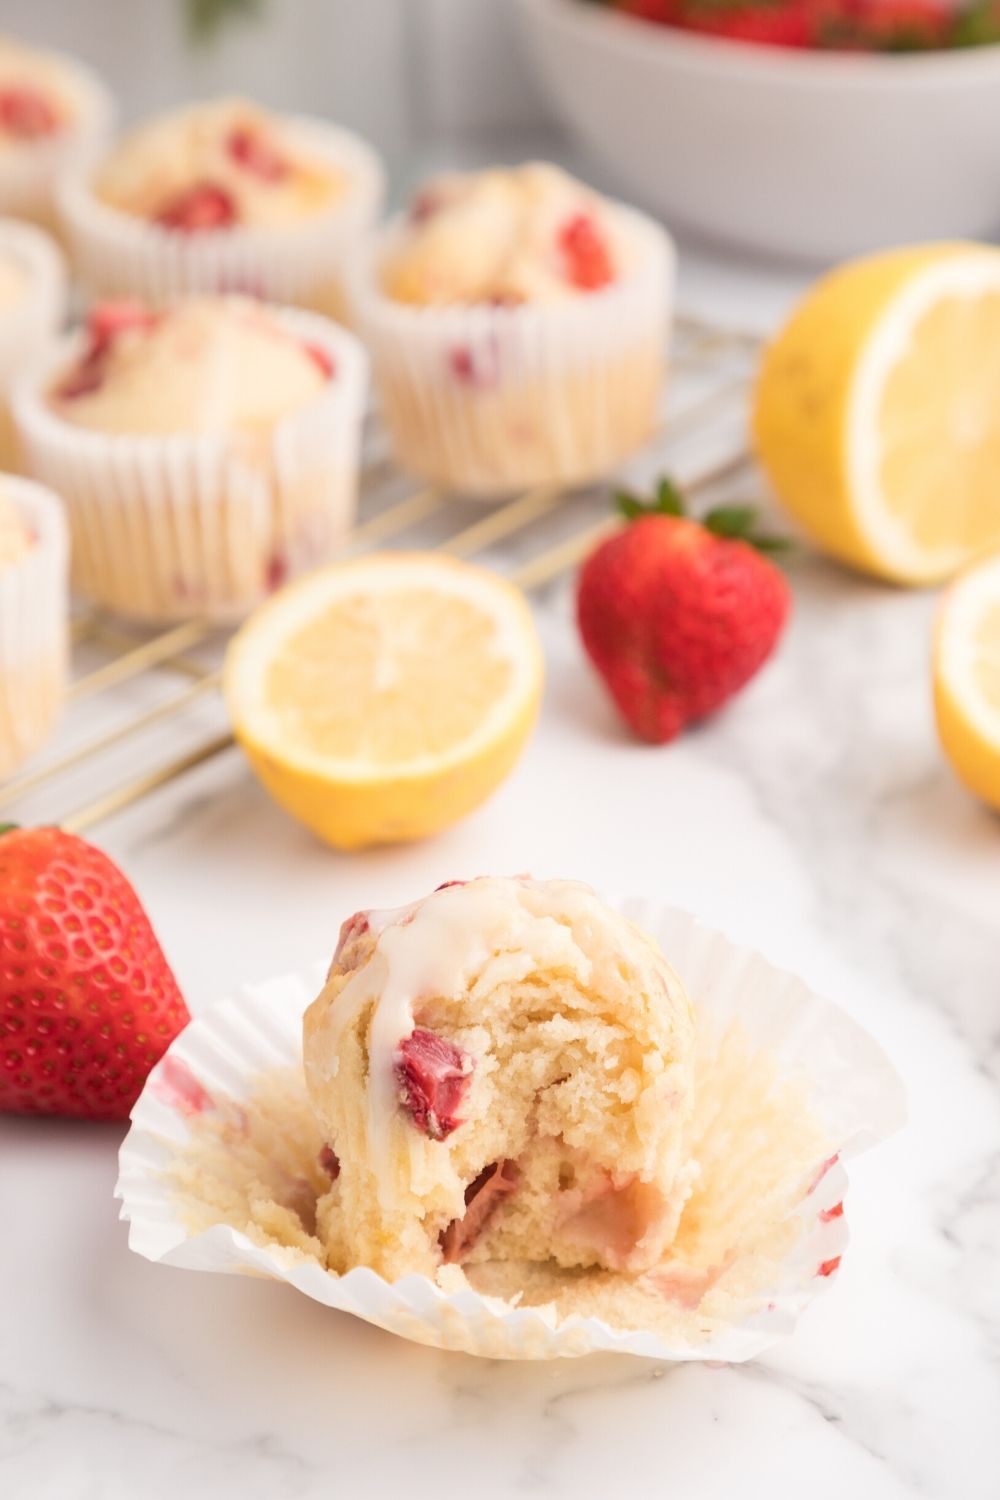 unwrapped strawberry lemon muffin, with frosting on top, in front of other muffins